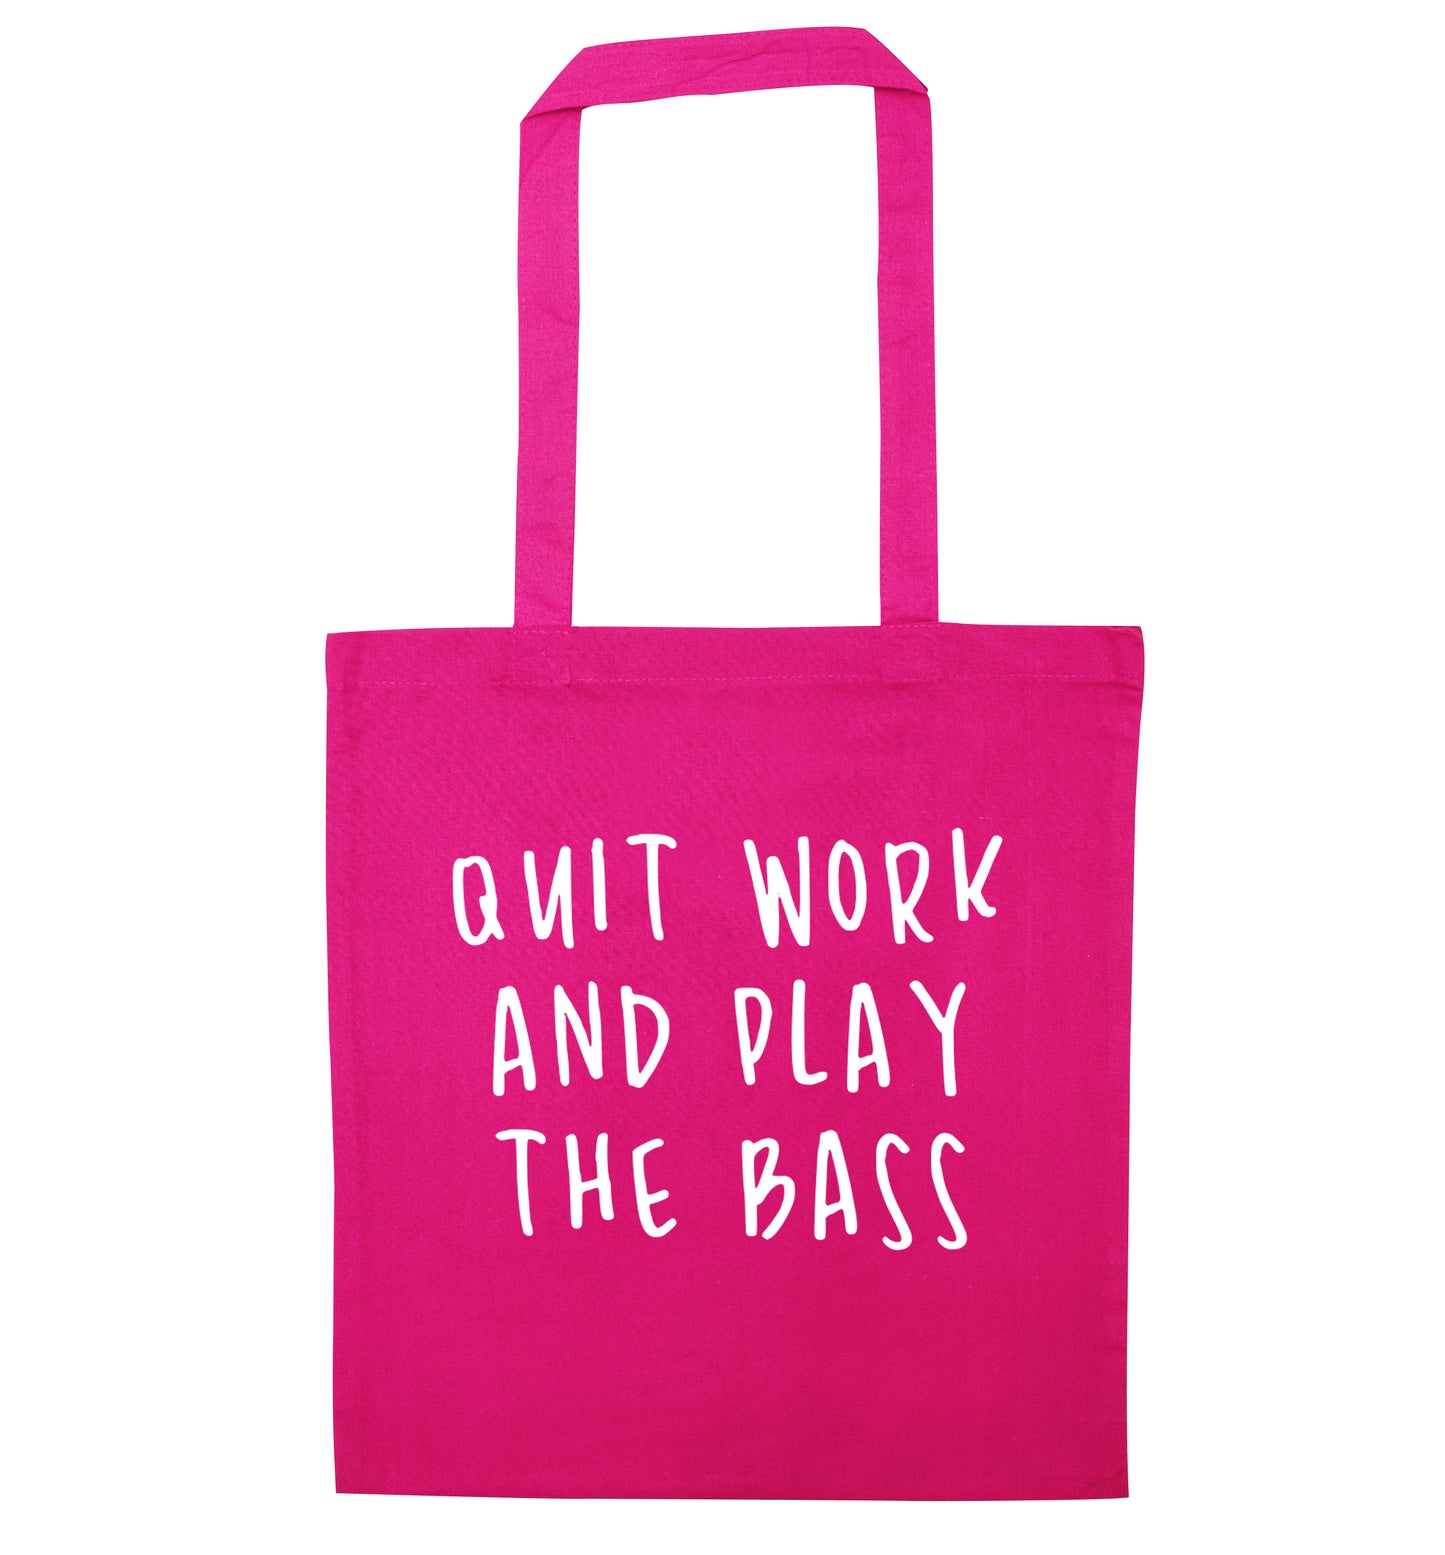 Quit work and play the bass pink tote bag